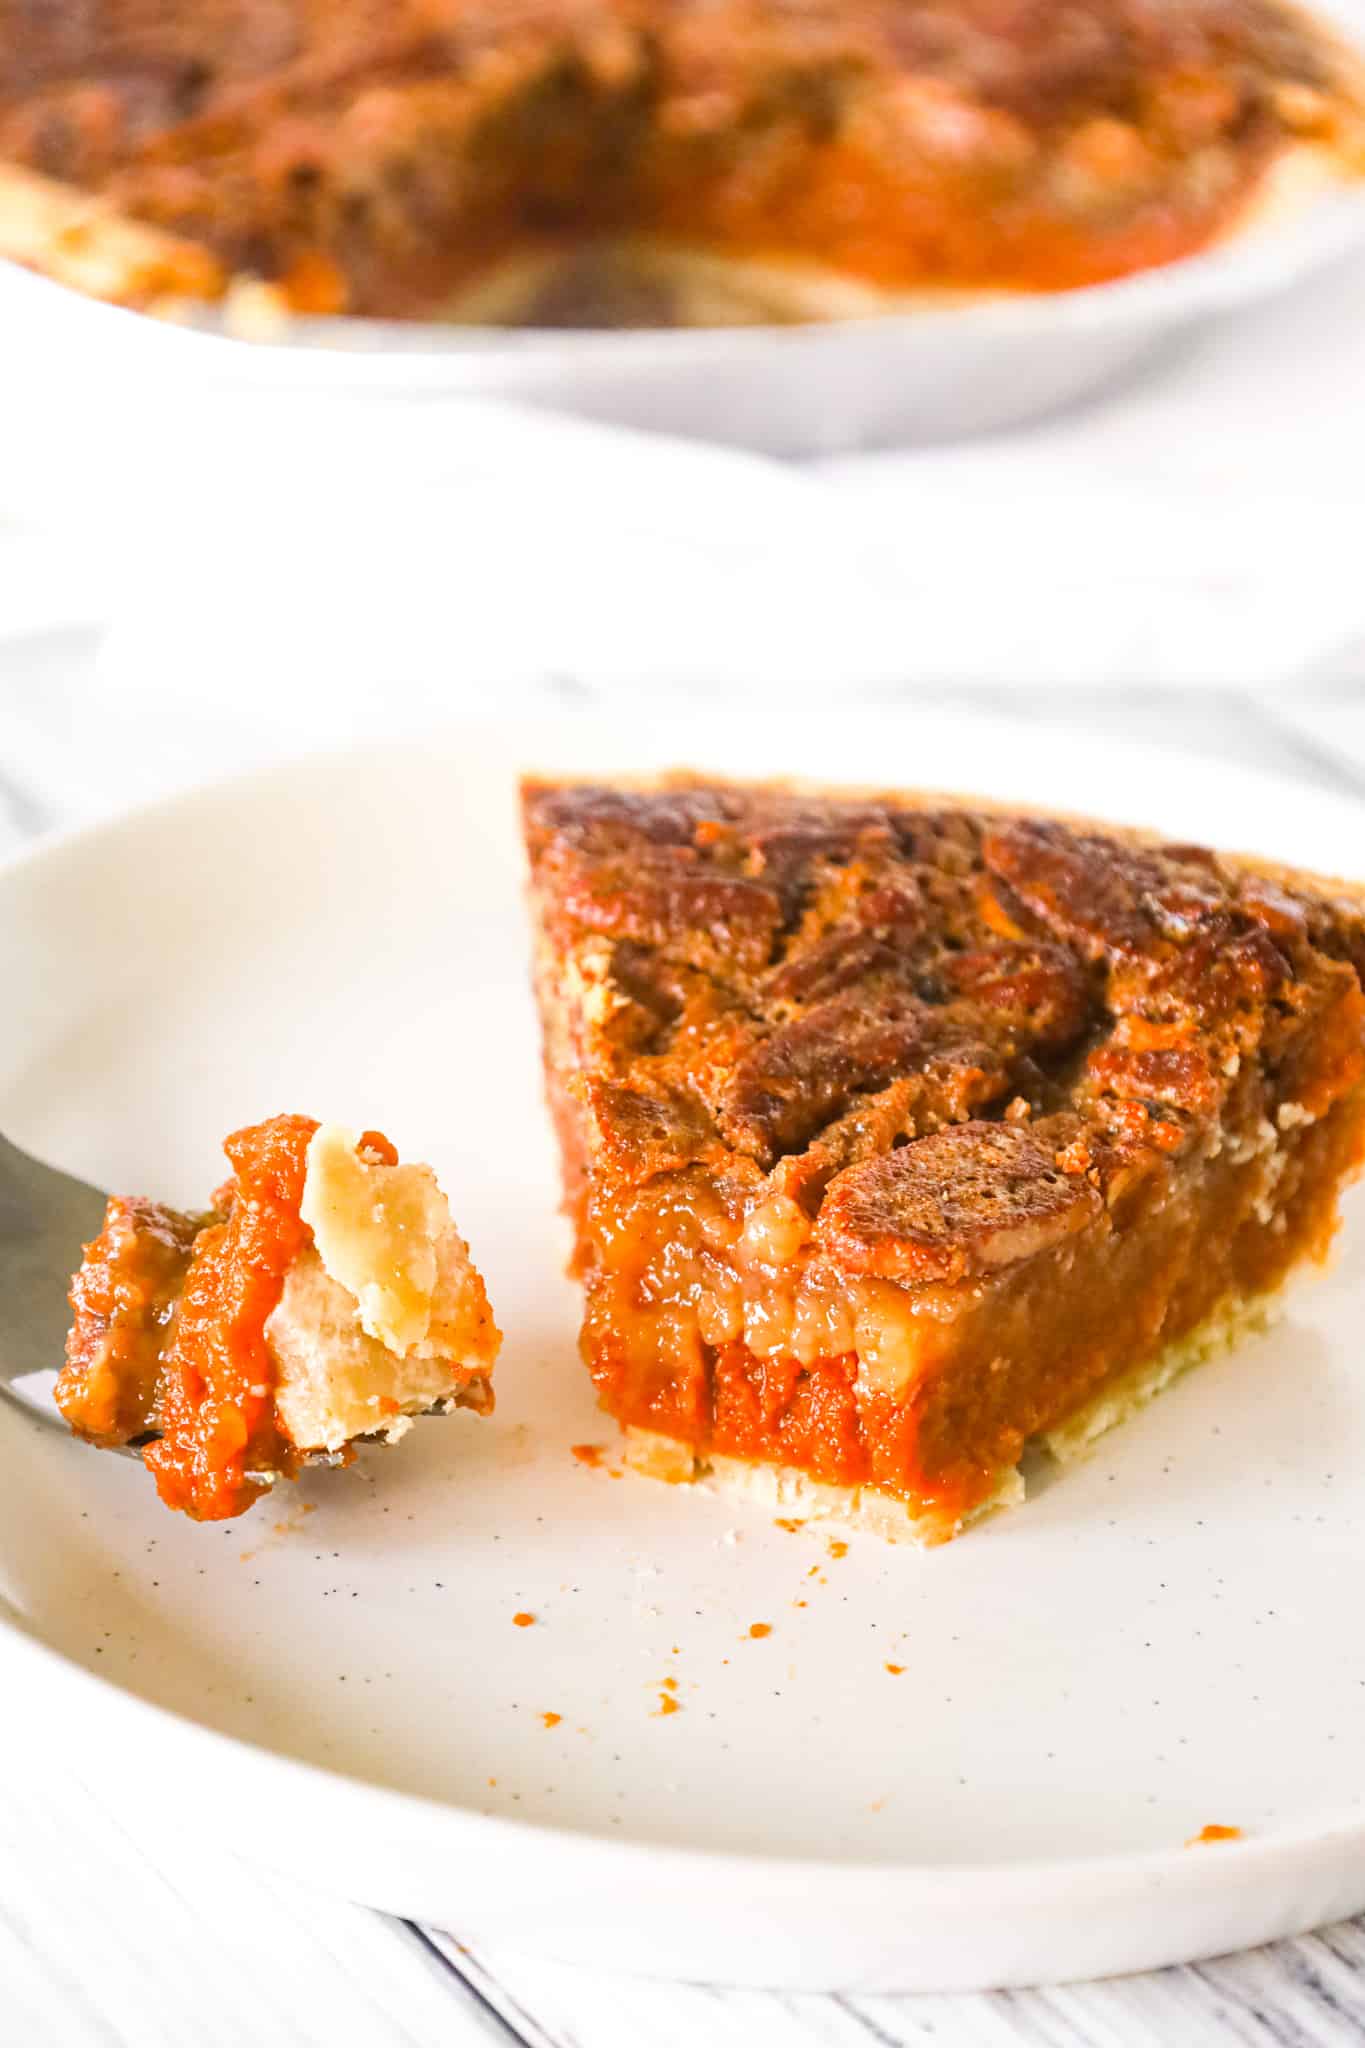 Pumpkin Pecan Pie is a delicious dessert recipe using a store bought pie crust with a layer of spiced pumpkin and topped with a gooey pecan mixture.